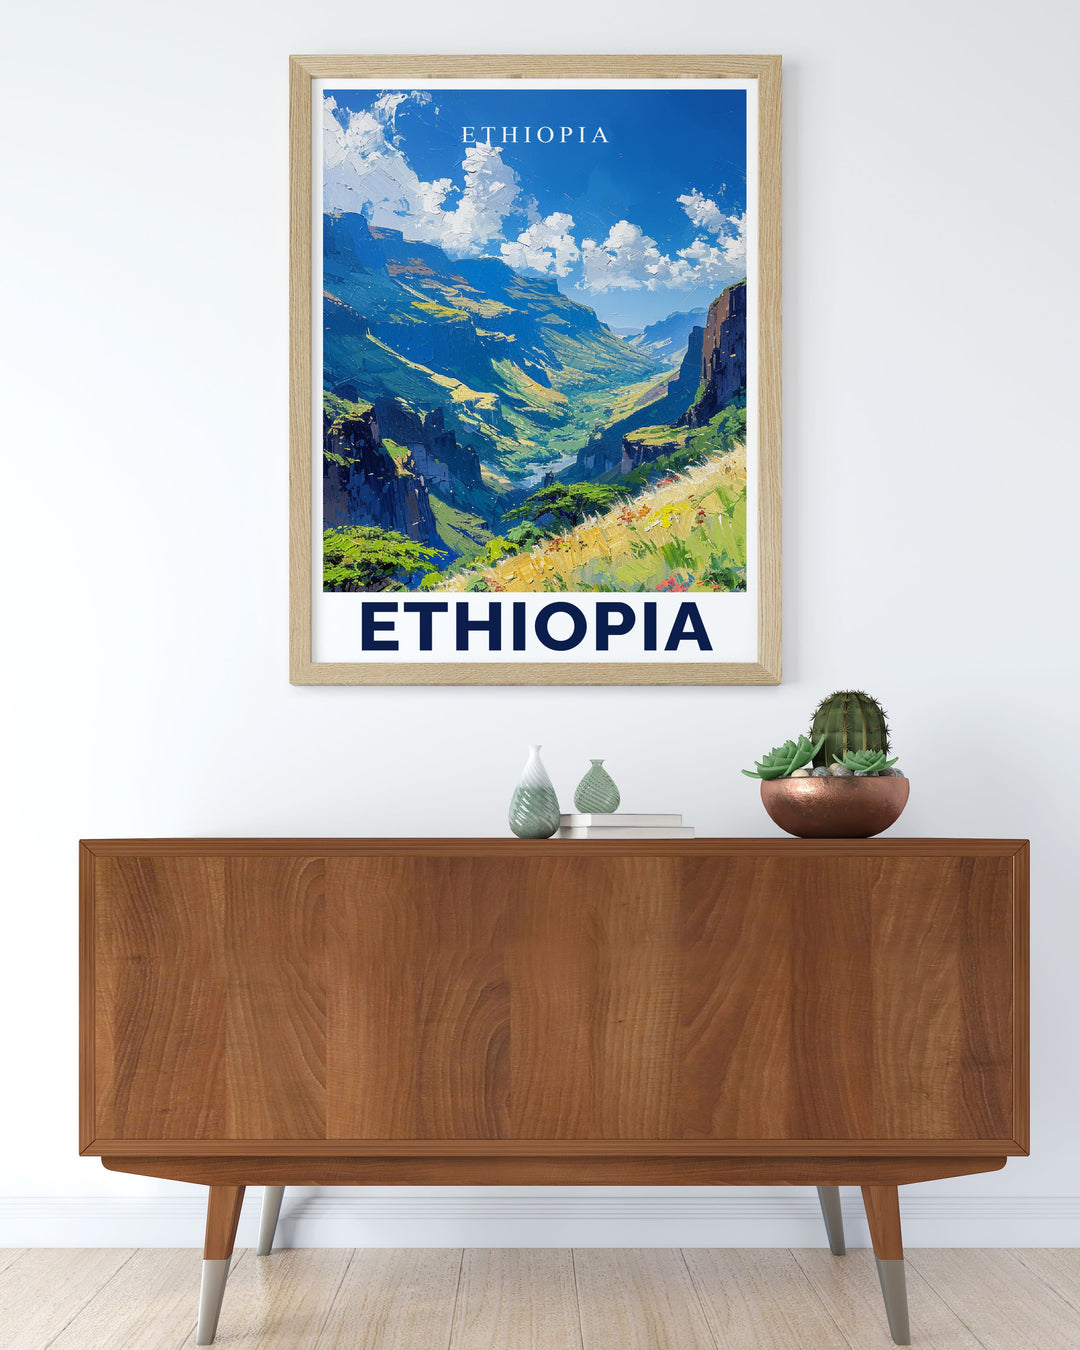 Ethiopia Art Print of the Simien Mountains highlighting the intricate details and vibrant colors of this majestic region a stunning reminder of Ethiopias natural beauty perfect for any room